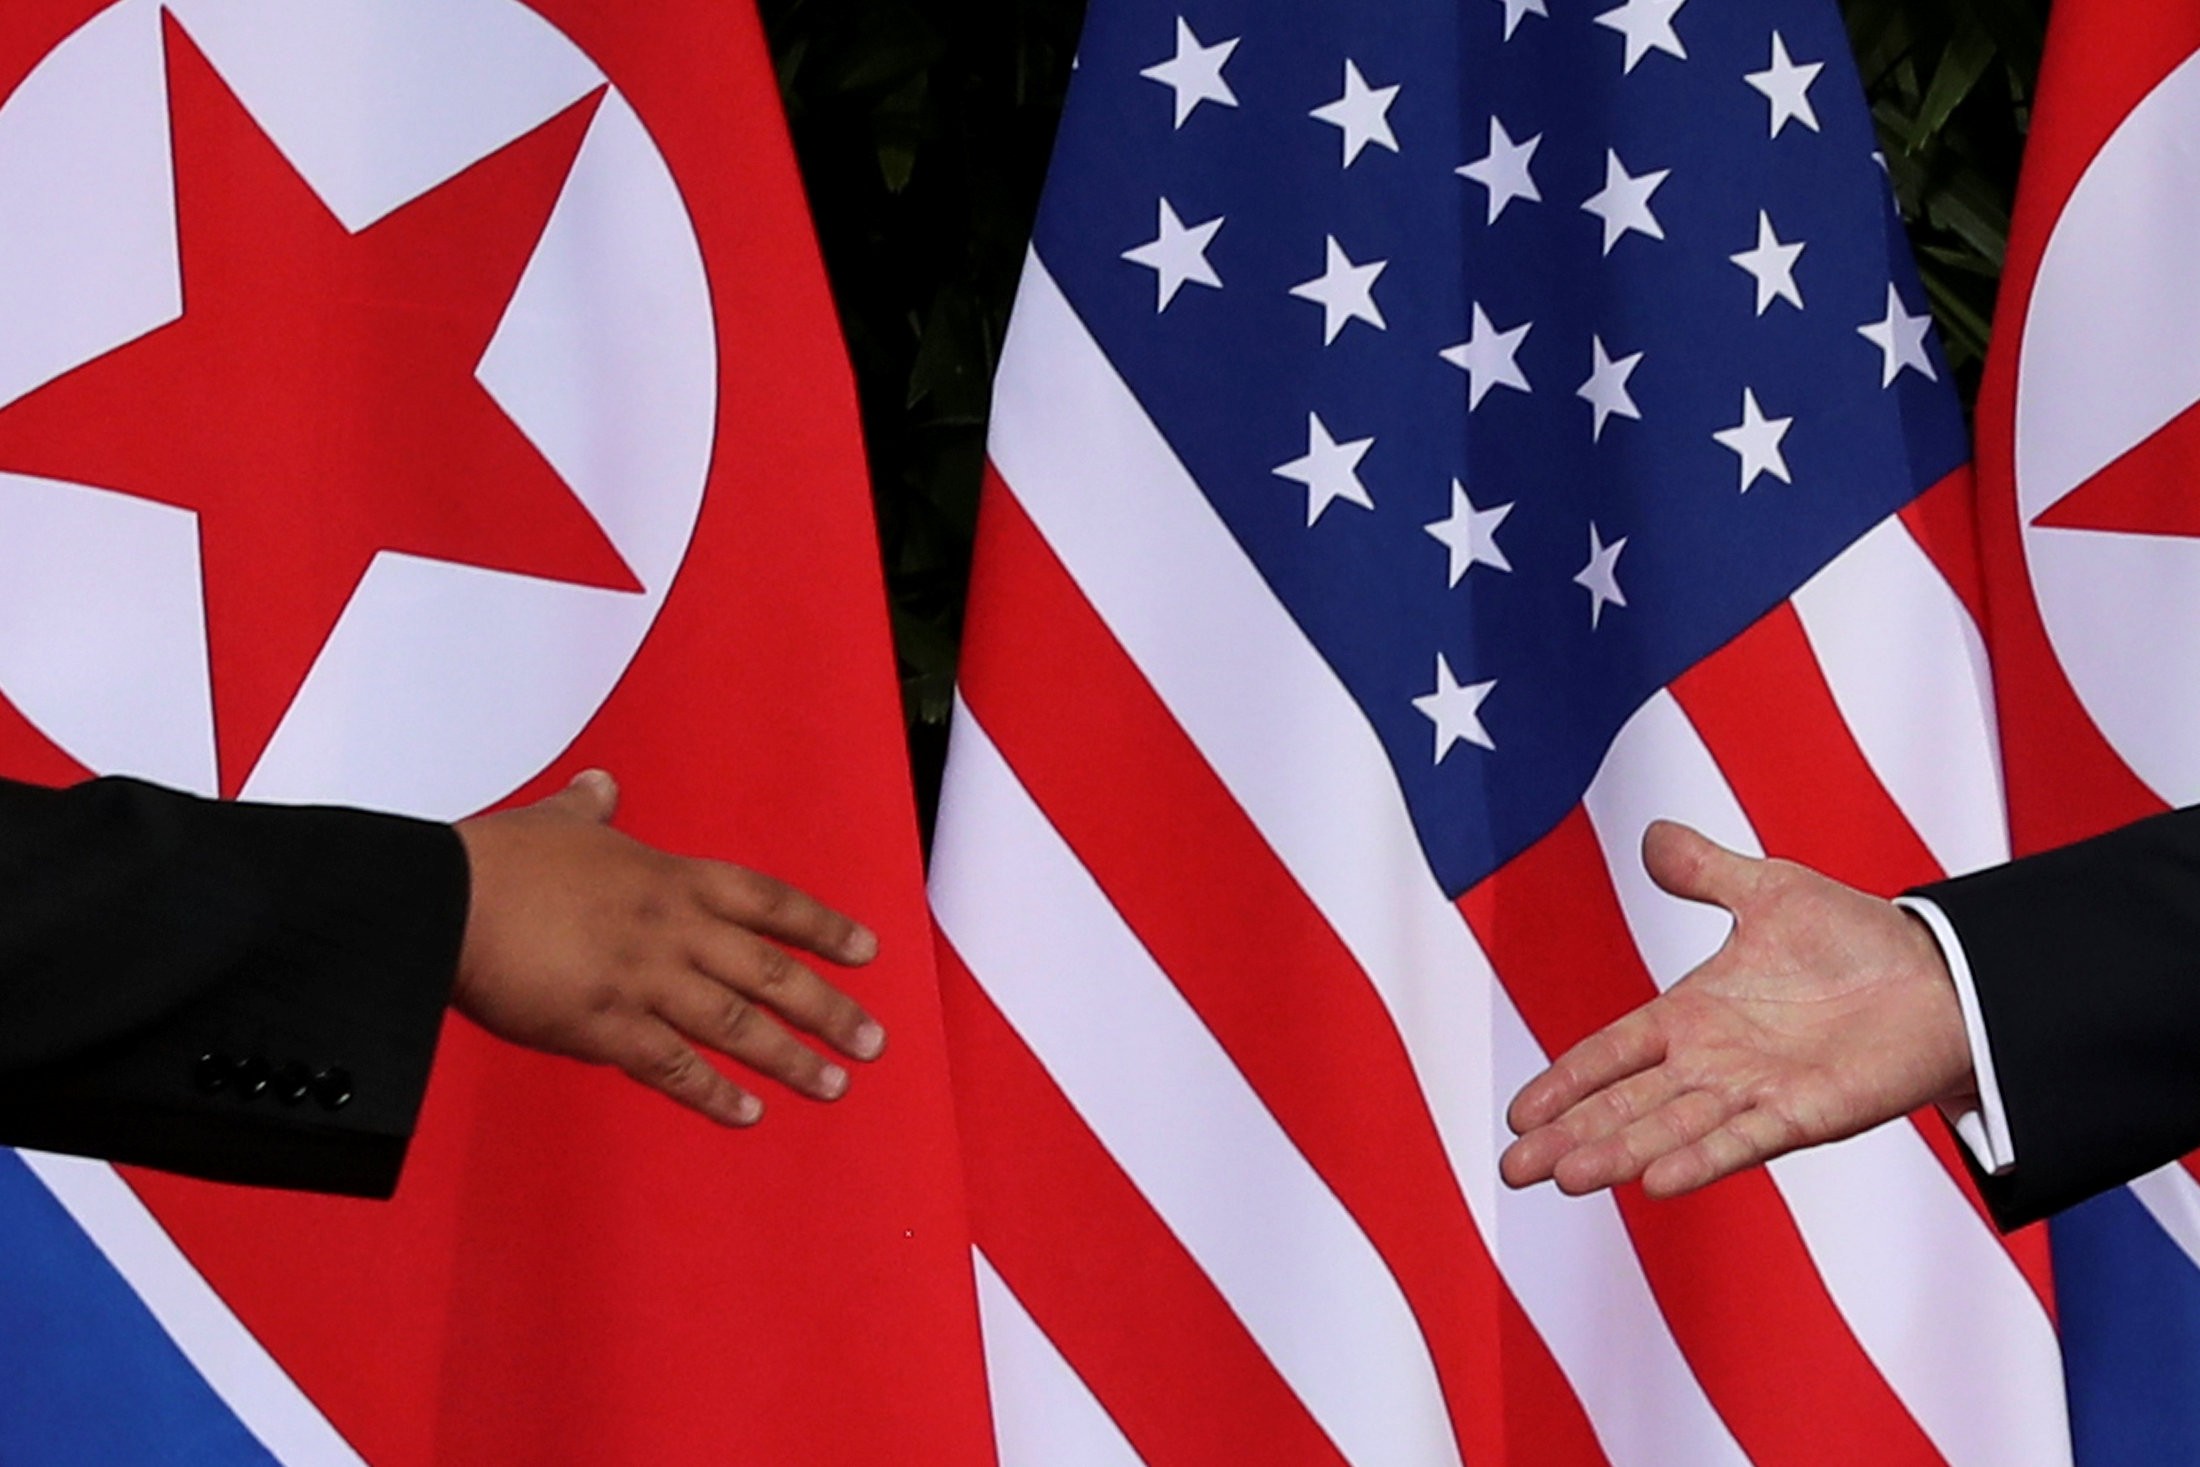 Washington and Pyongyang both expect something that the other side will not give, pointing to continuing stagnation in attempts to end the North Korean nuclear crisis. Photo: Reuters